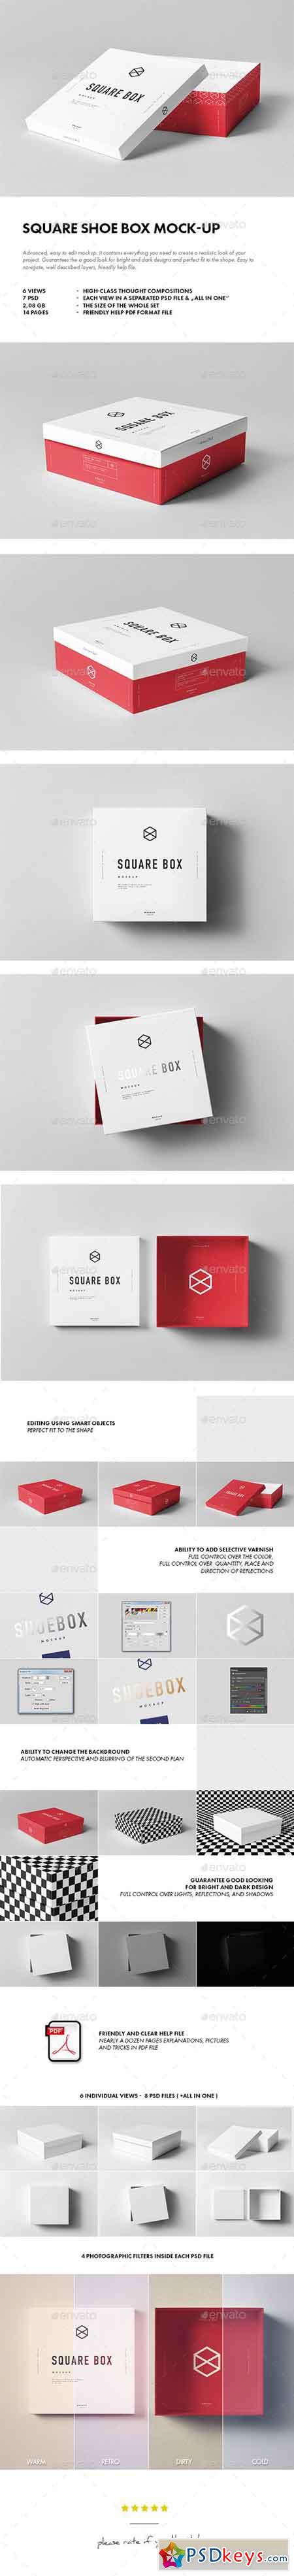 Download Square Shoe Box Mock-up 19137172 » Free Download Photoshop ...